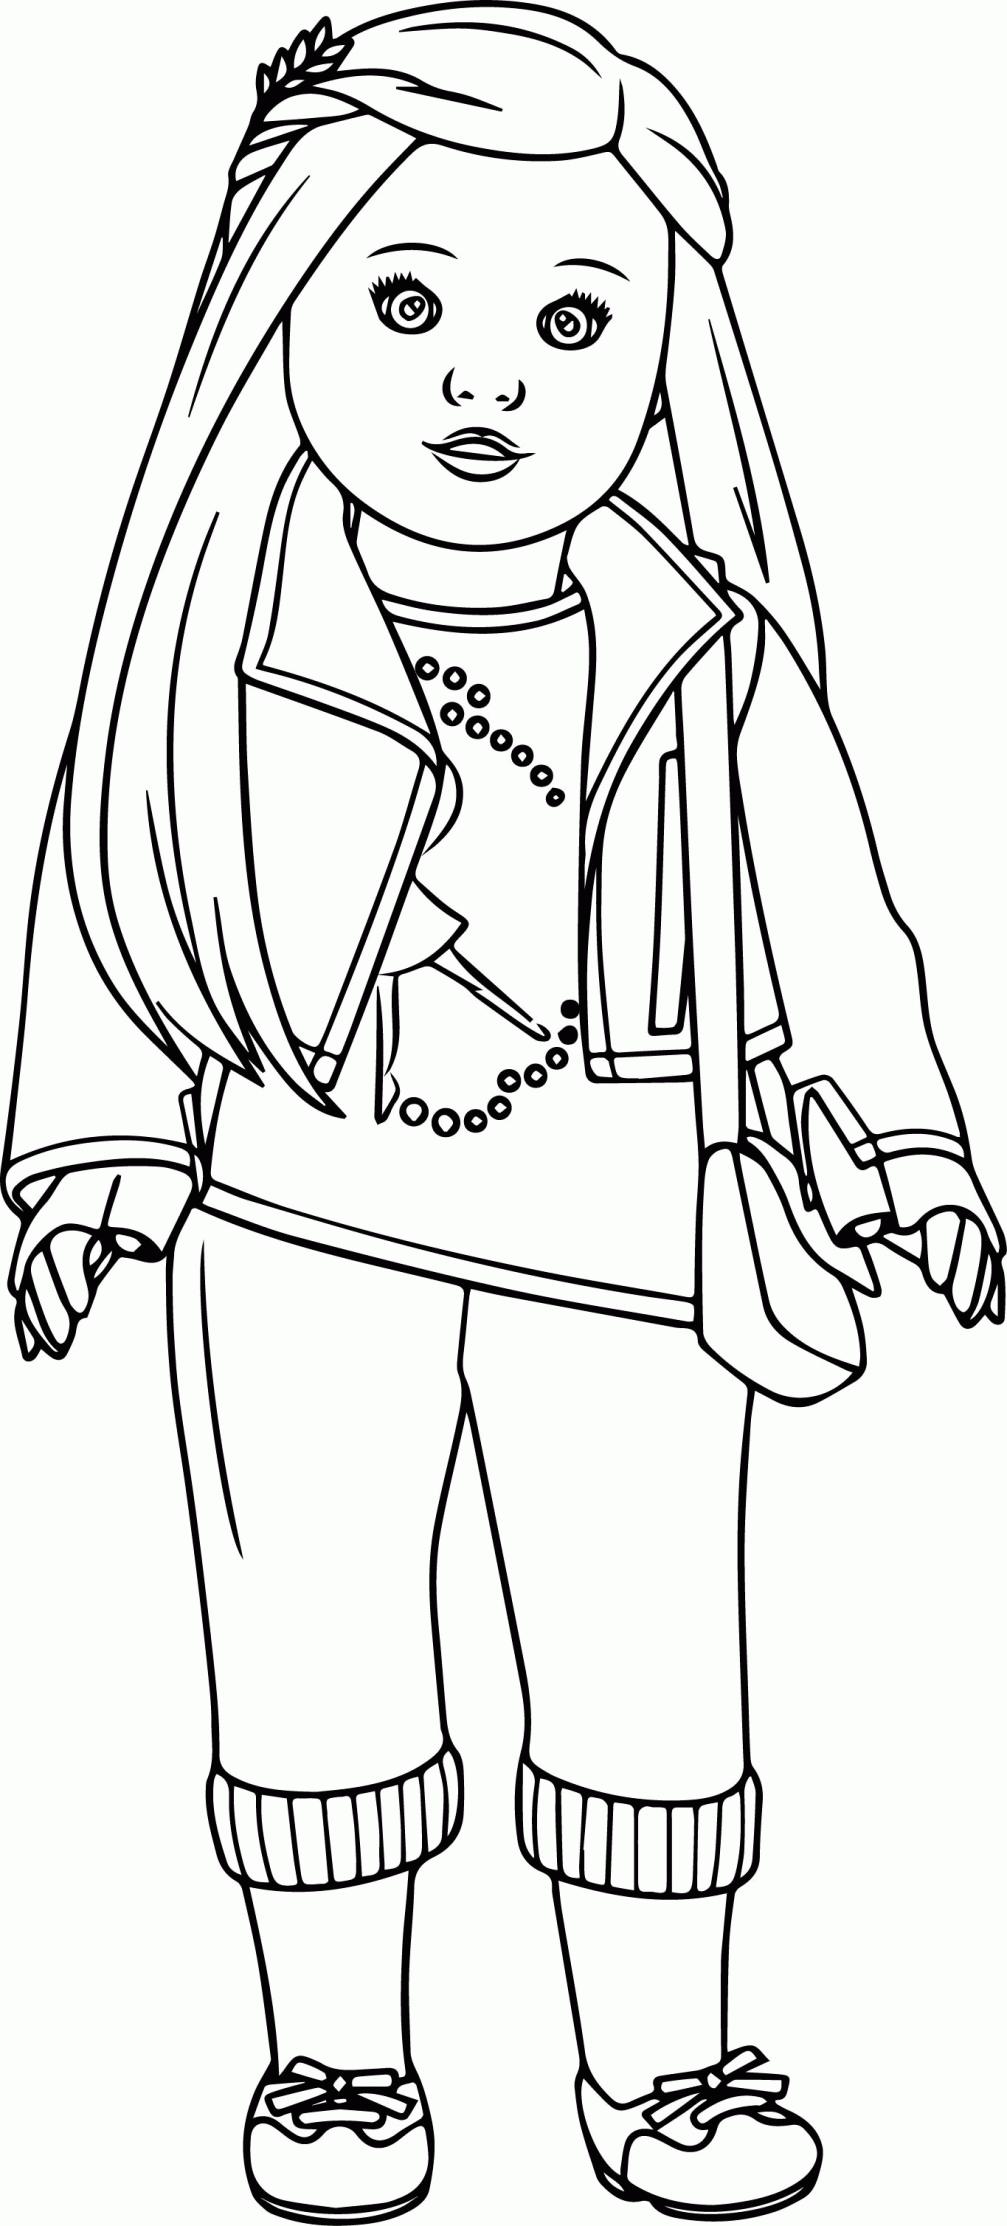 American Doll Accessories Coloring Pages - Coloring Pages For All Ages